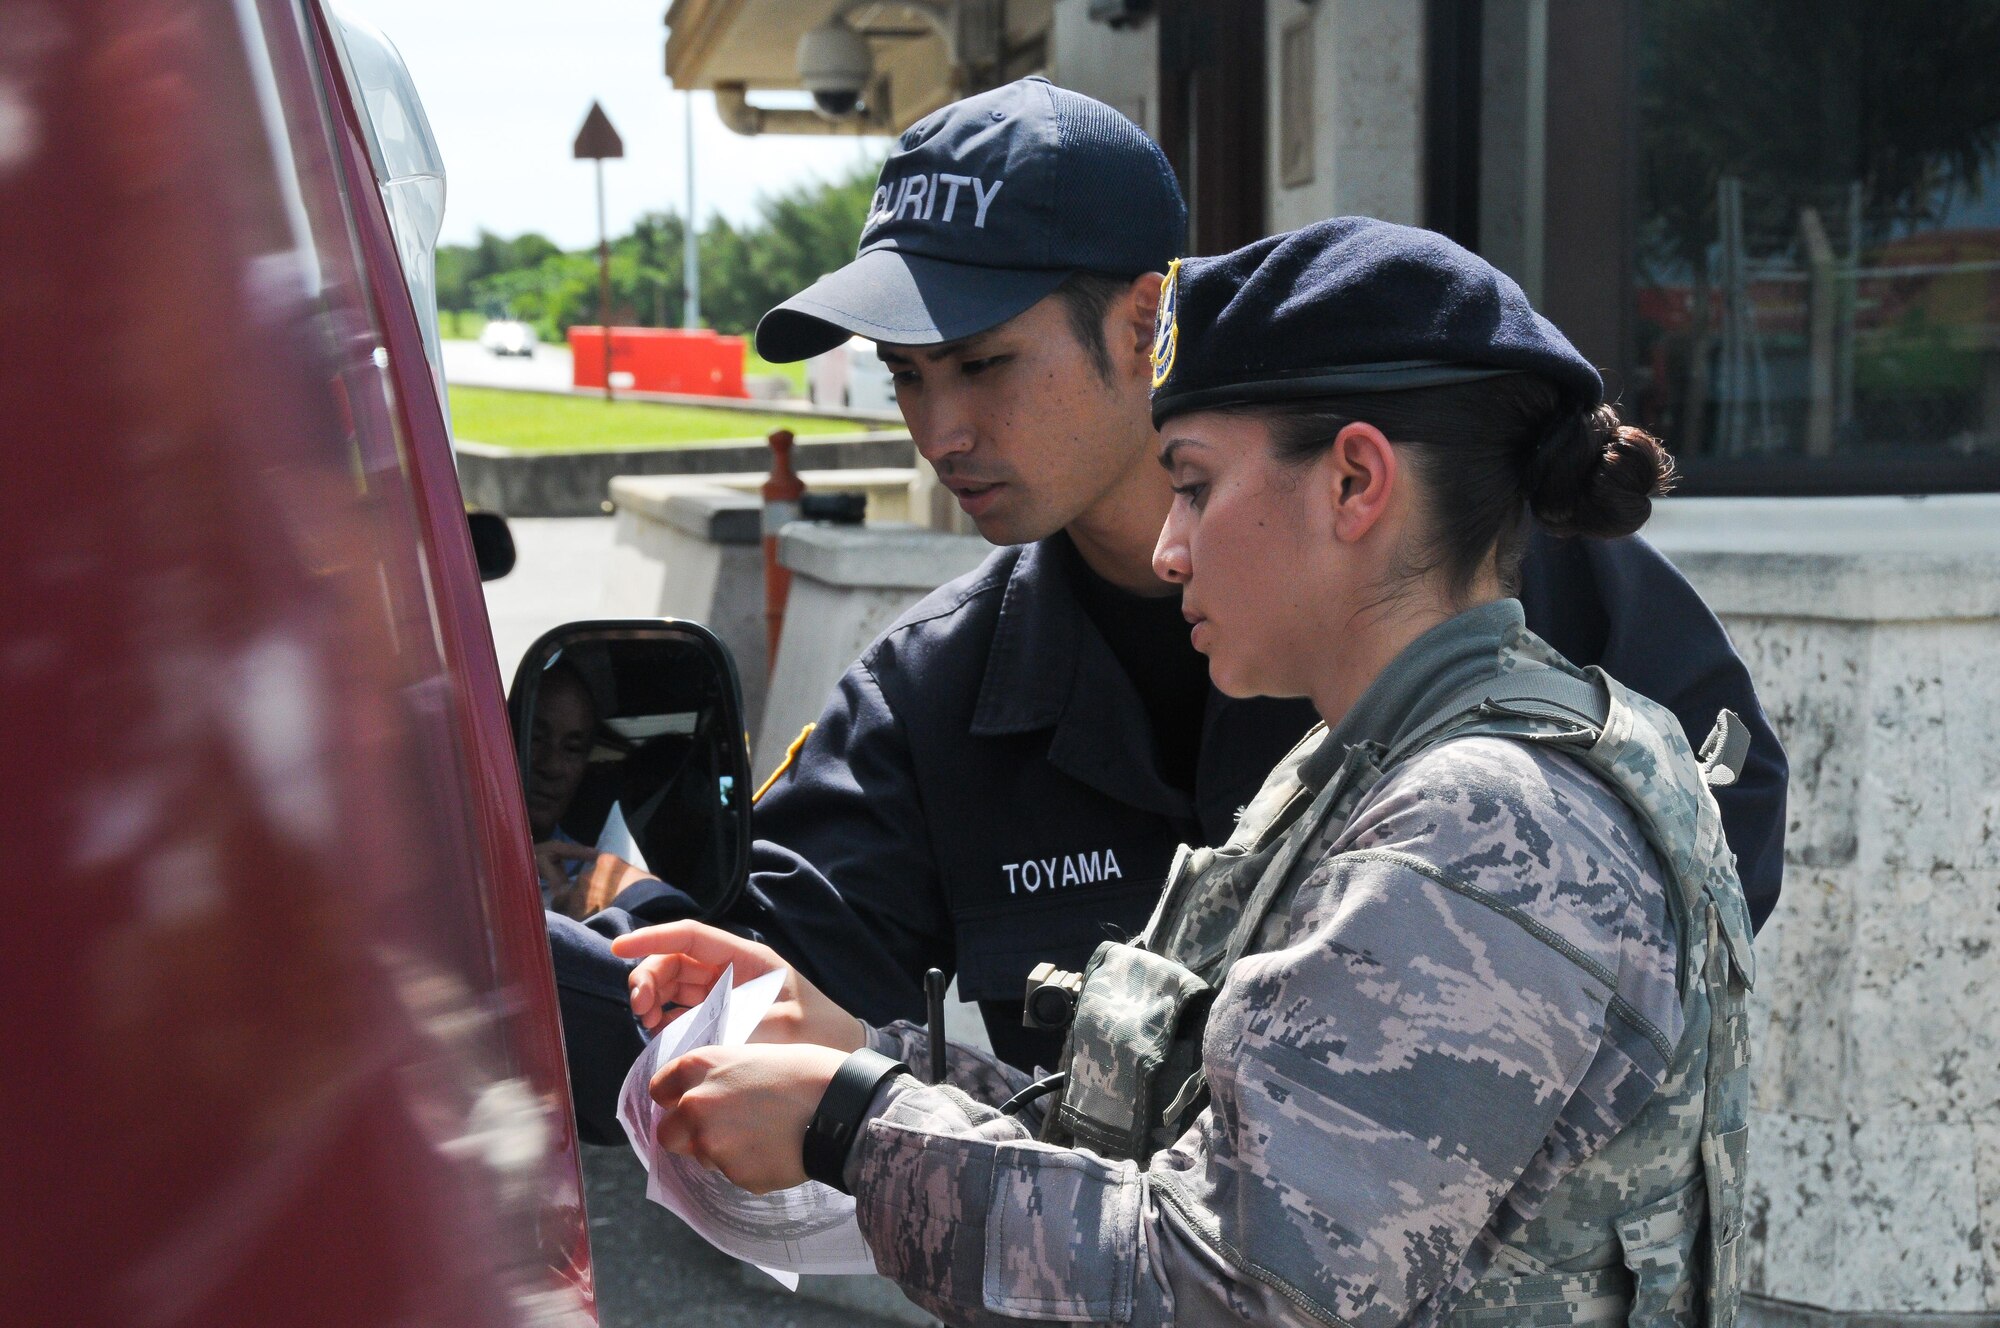 Senior Airman Dominique Castillo (right), 944th Security Forces Squadron member, and Kadena Gate Guard Hiroyuki Toyama, 18th Security Forces Squadron, check a visitor’s credentials in order to allow him base access June 28, 2016, at Gate 1 at Kadena Air Base, Okinawa.  A native Arizonian, Castillo has been a Reservist with the 944th for four years and the opportunity to do an off-station annual tour is valuable to her. The 18th Security Forces Squadron capitalized on the extensive experience 944th SFS members brought during their annual tour by seamlessly integrating them into all of their flights. (U.S. Air Force photo by Staff Sgt. Nestor Cruz)